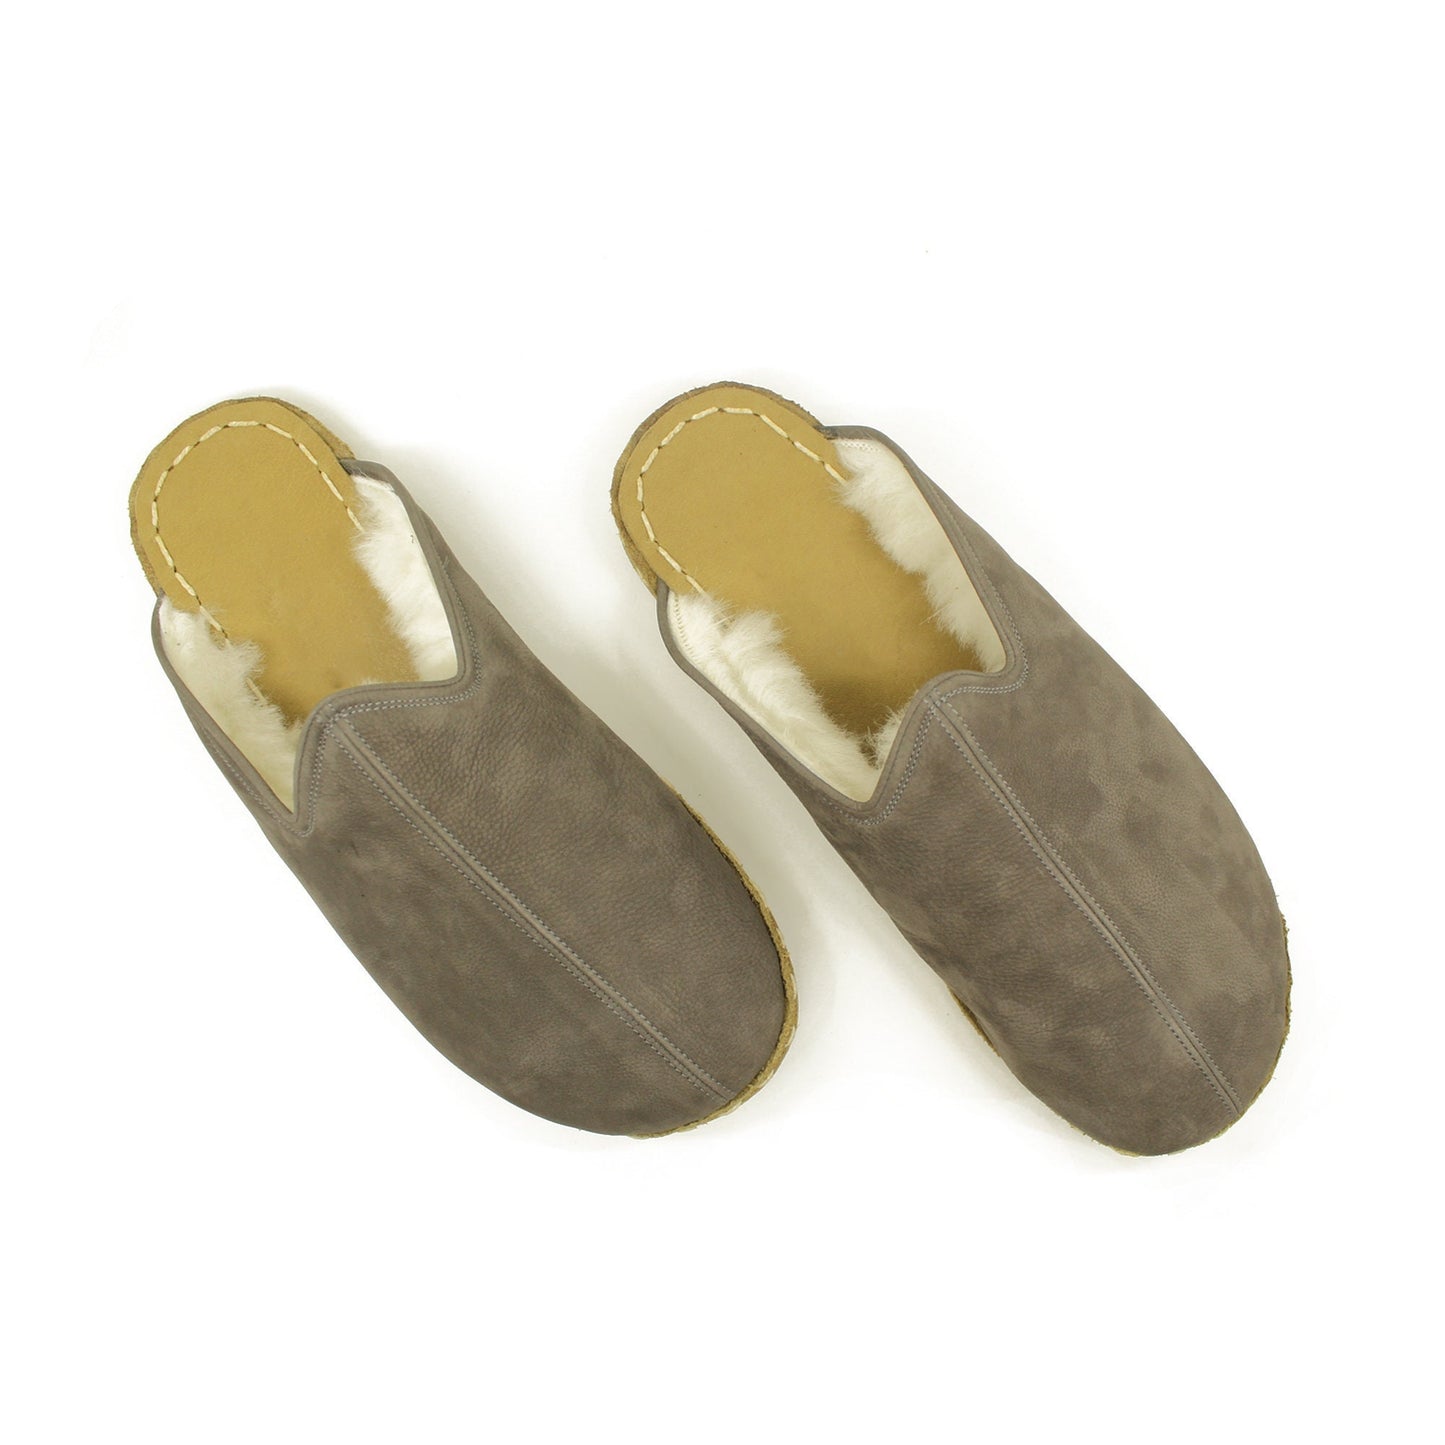 Nefes Leather Slippers with Fur: Women's Barefoot Elegance